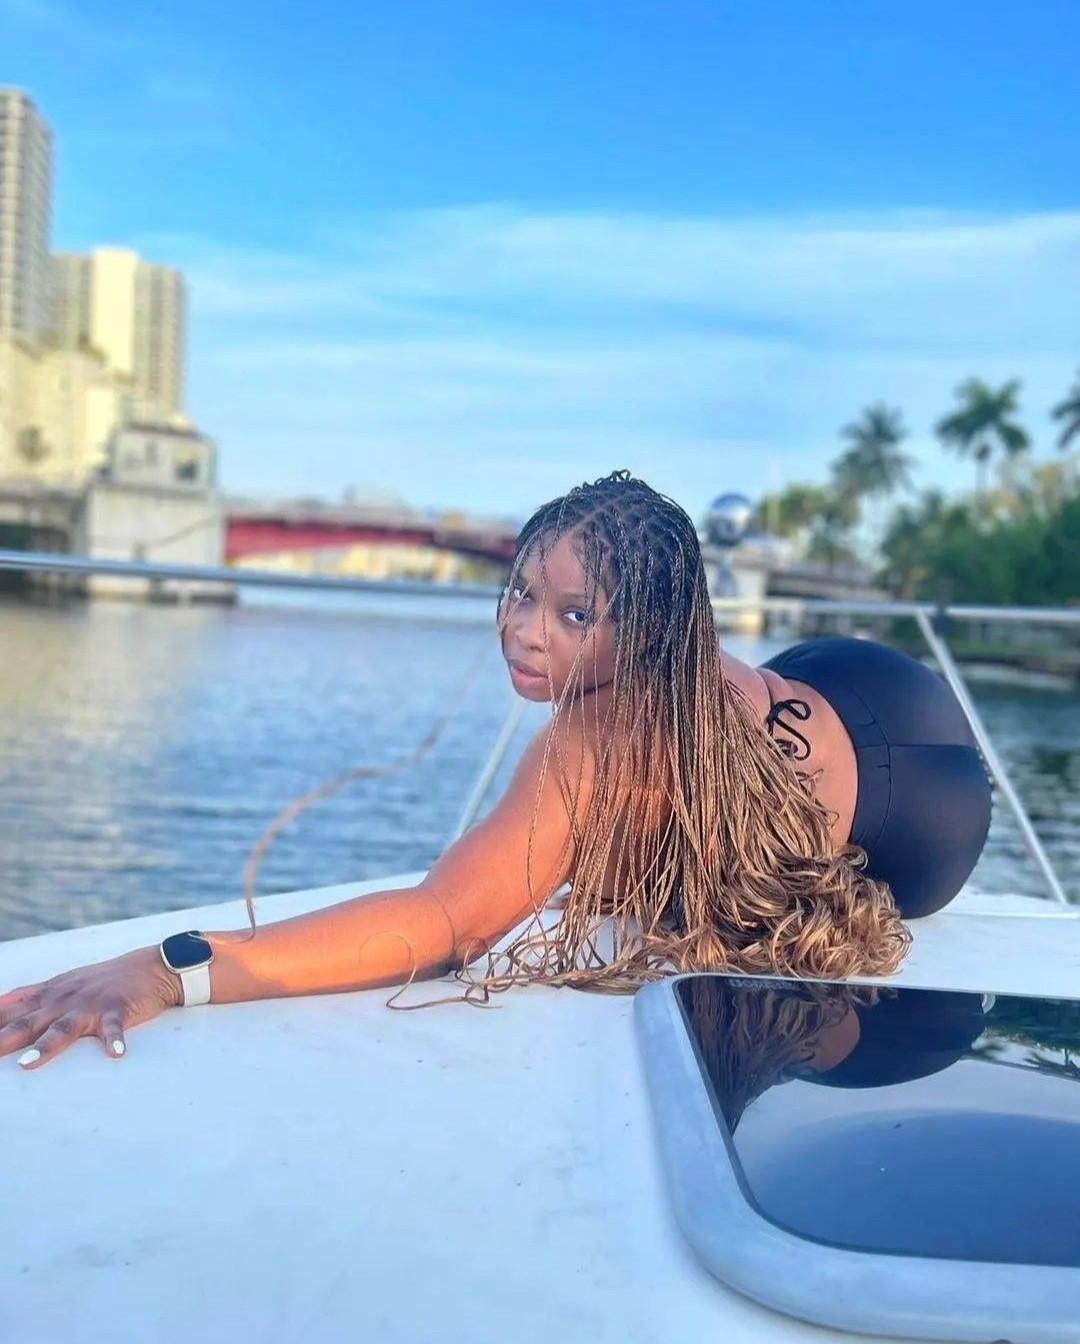 Yemi Alade puts her hot body on display as she  enjoys a yacht ride with friends in Florida (photos)